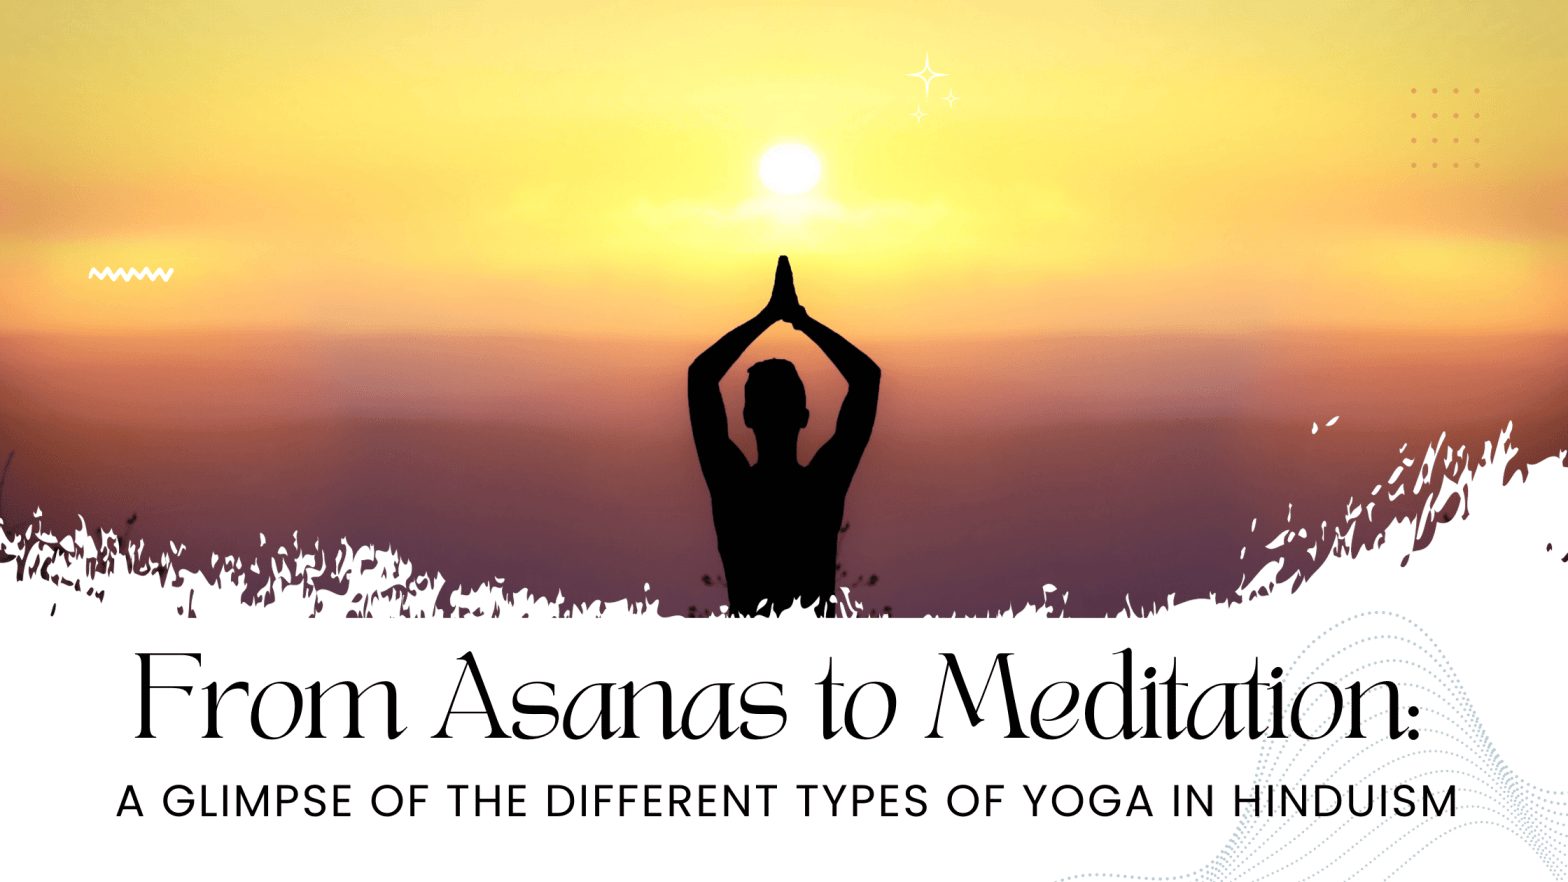 From Asanas to Meditation: A Glimpse of the Different Types of Yoga in Hinduism